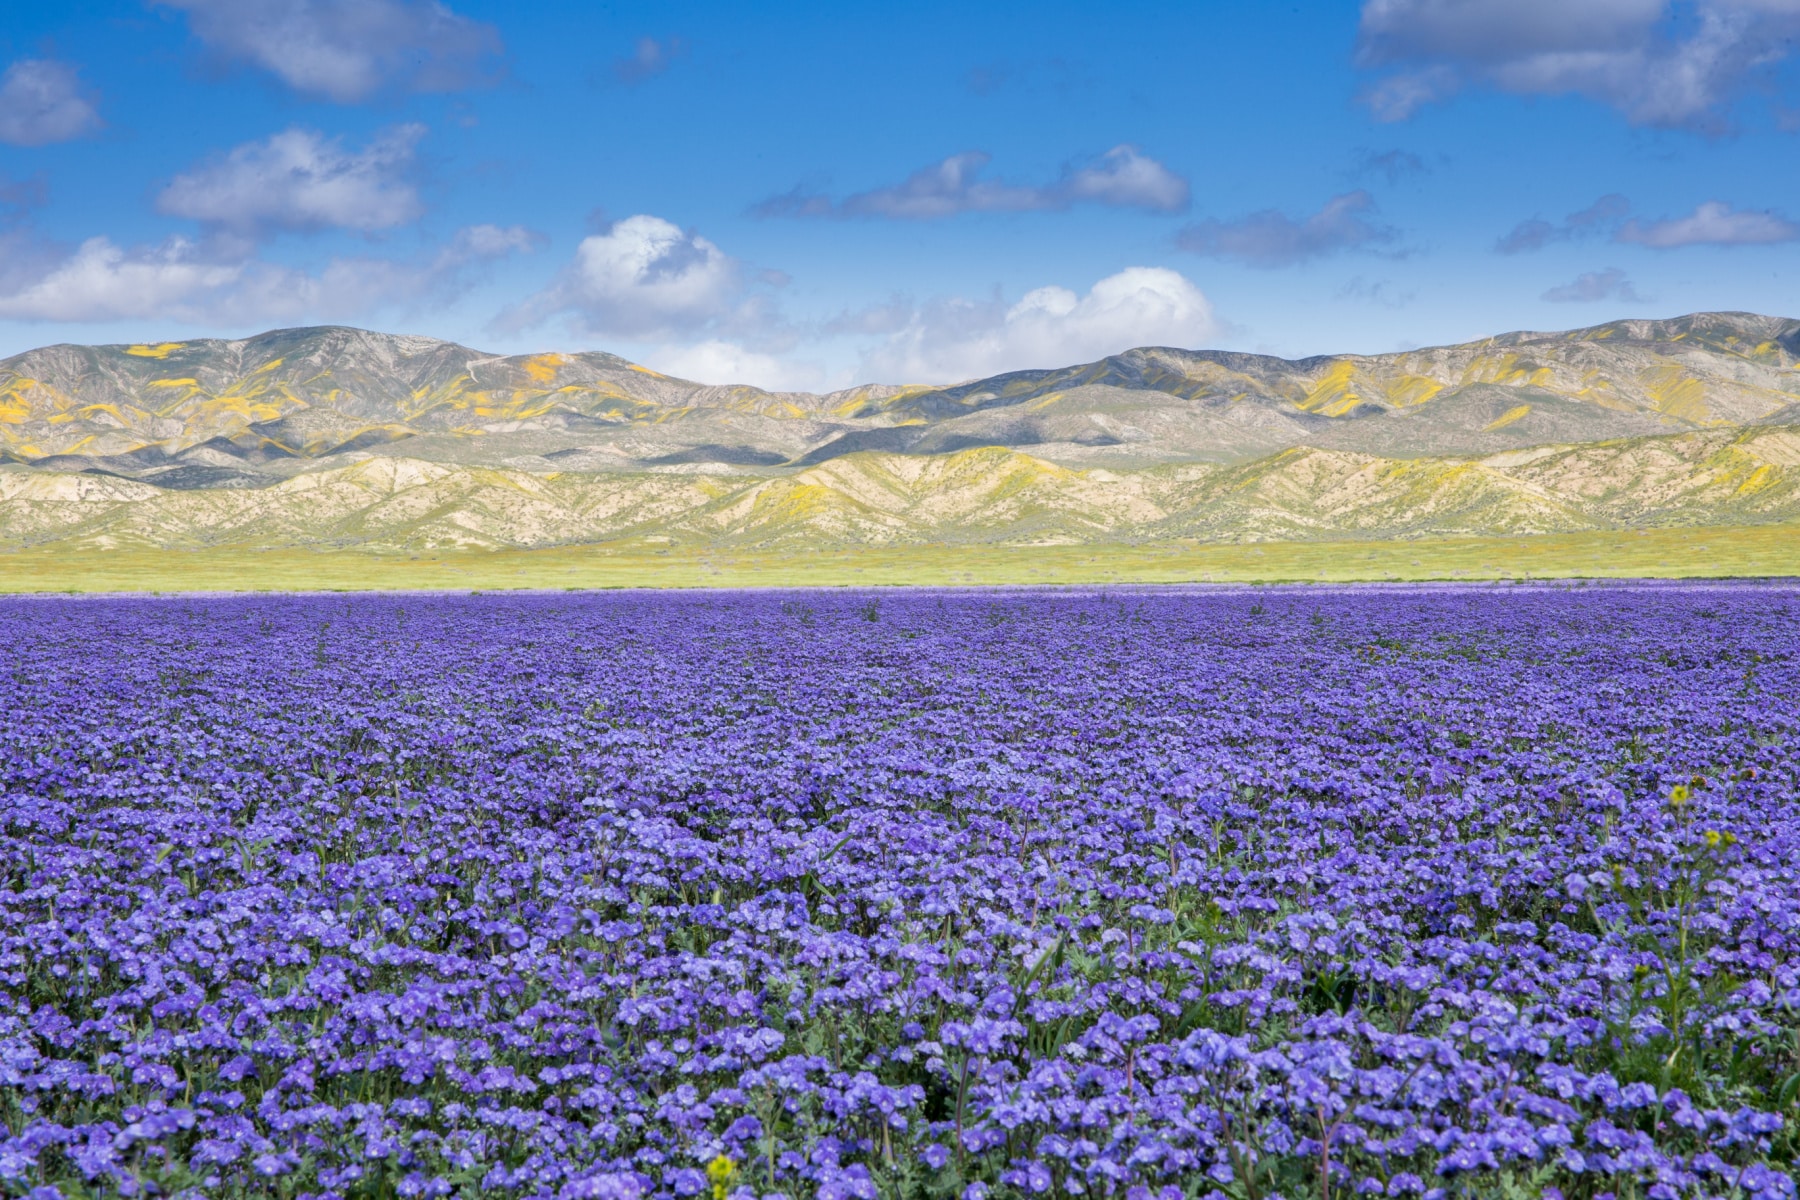 Death Valley Super Bloom makes this one of the best national parks to visit in March. 